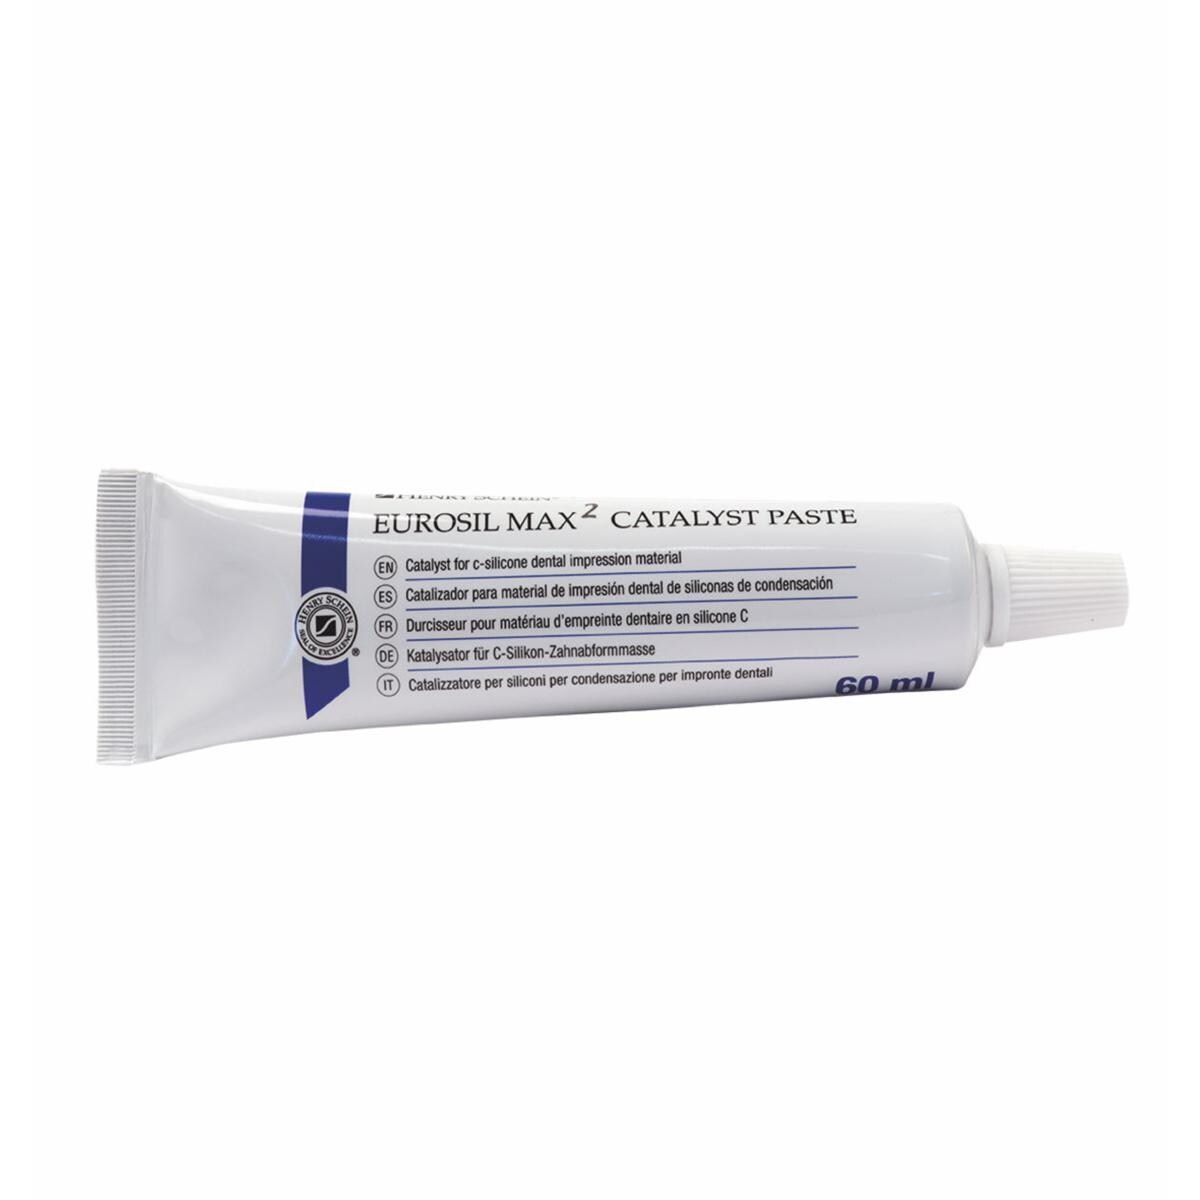 HS Eurosil Max 2 Catalyst Paste 60ml - **dental clinic use only**